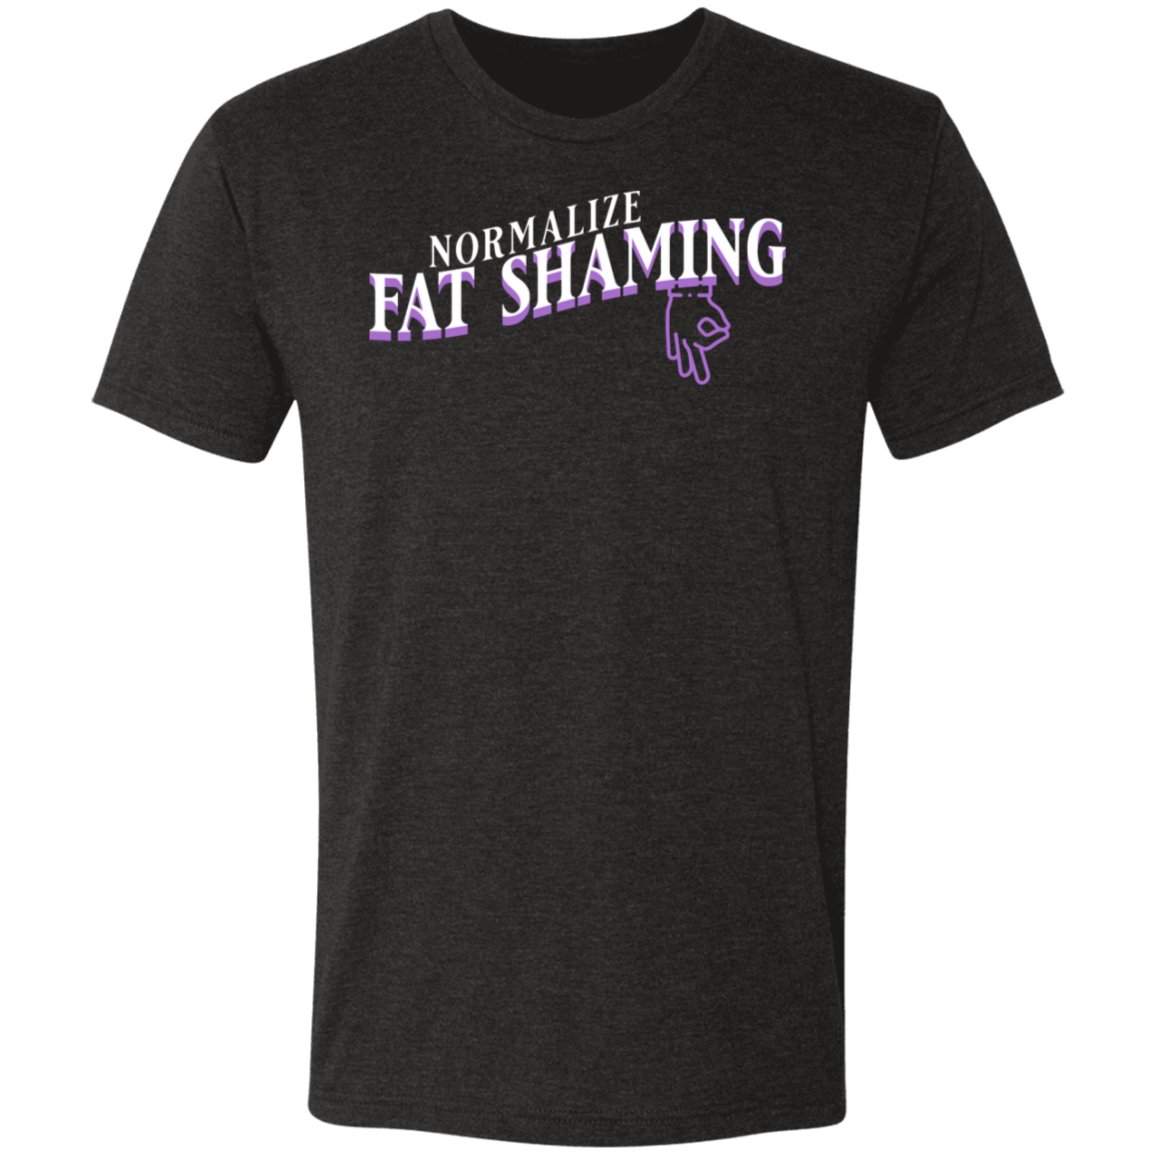 Normalize Shaming Tri-blend Gym Tee - T-Shirts